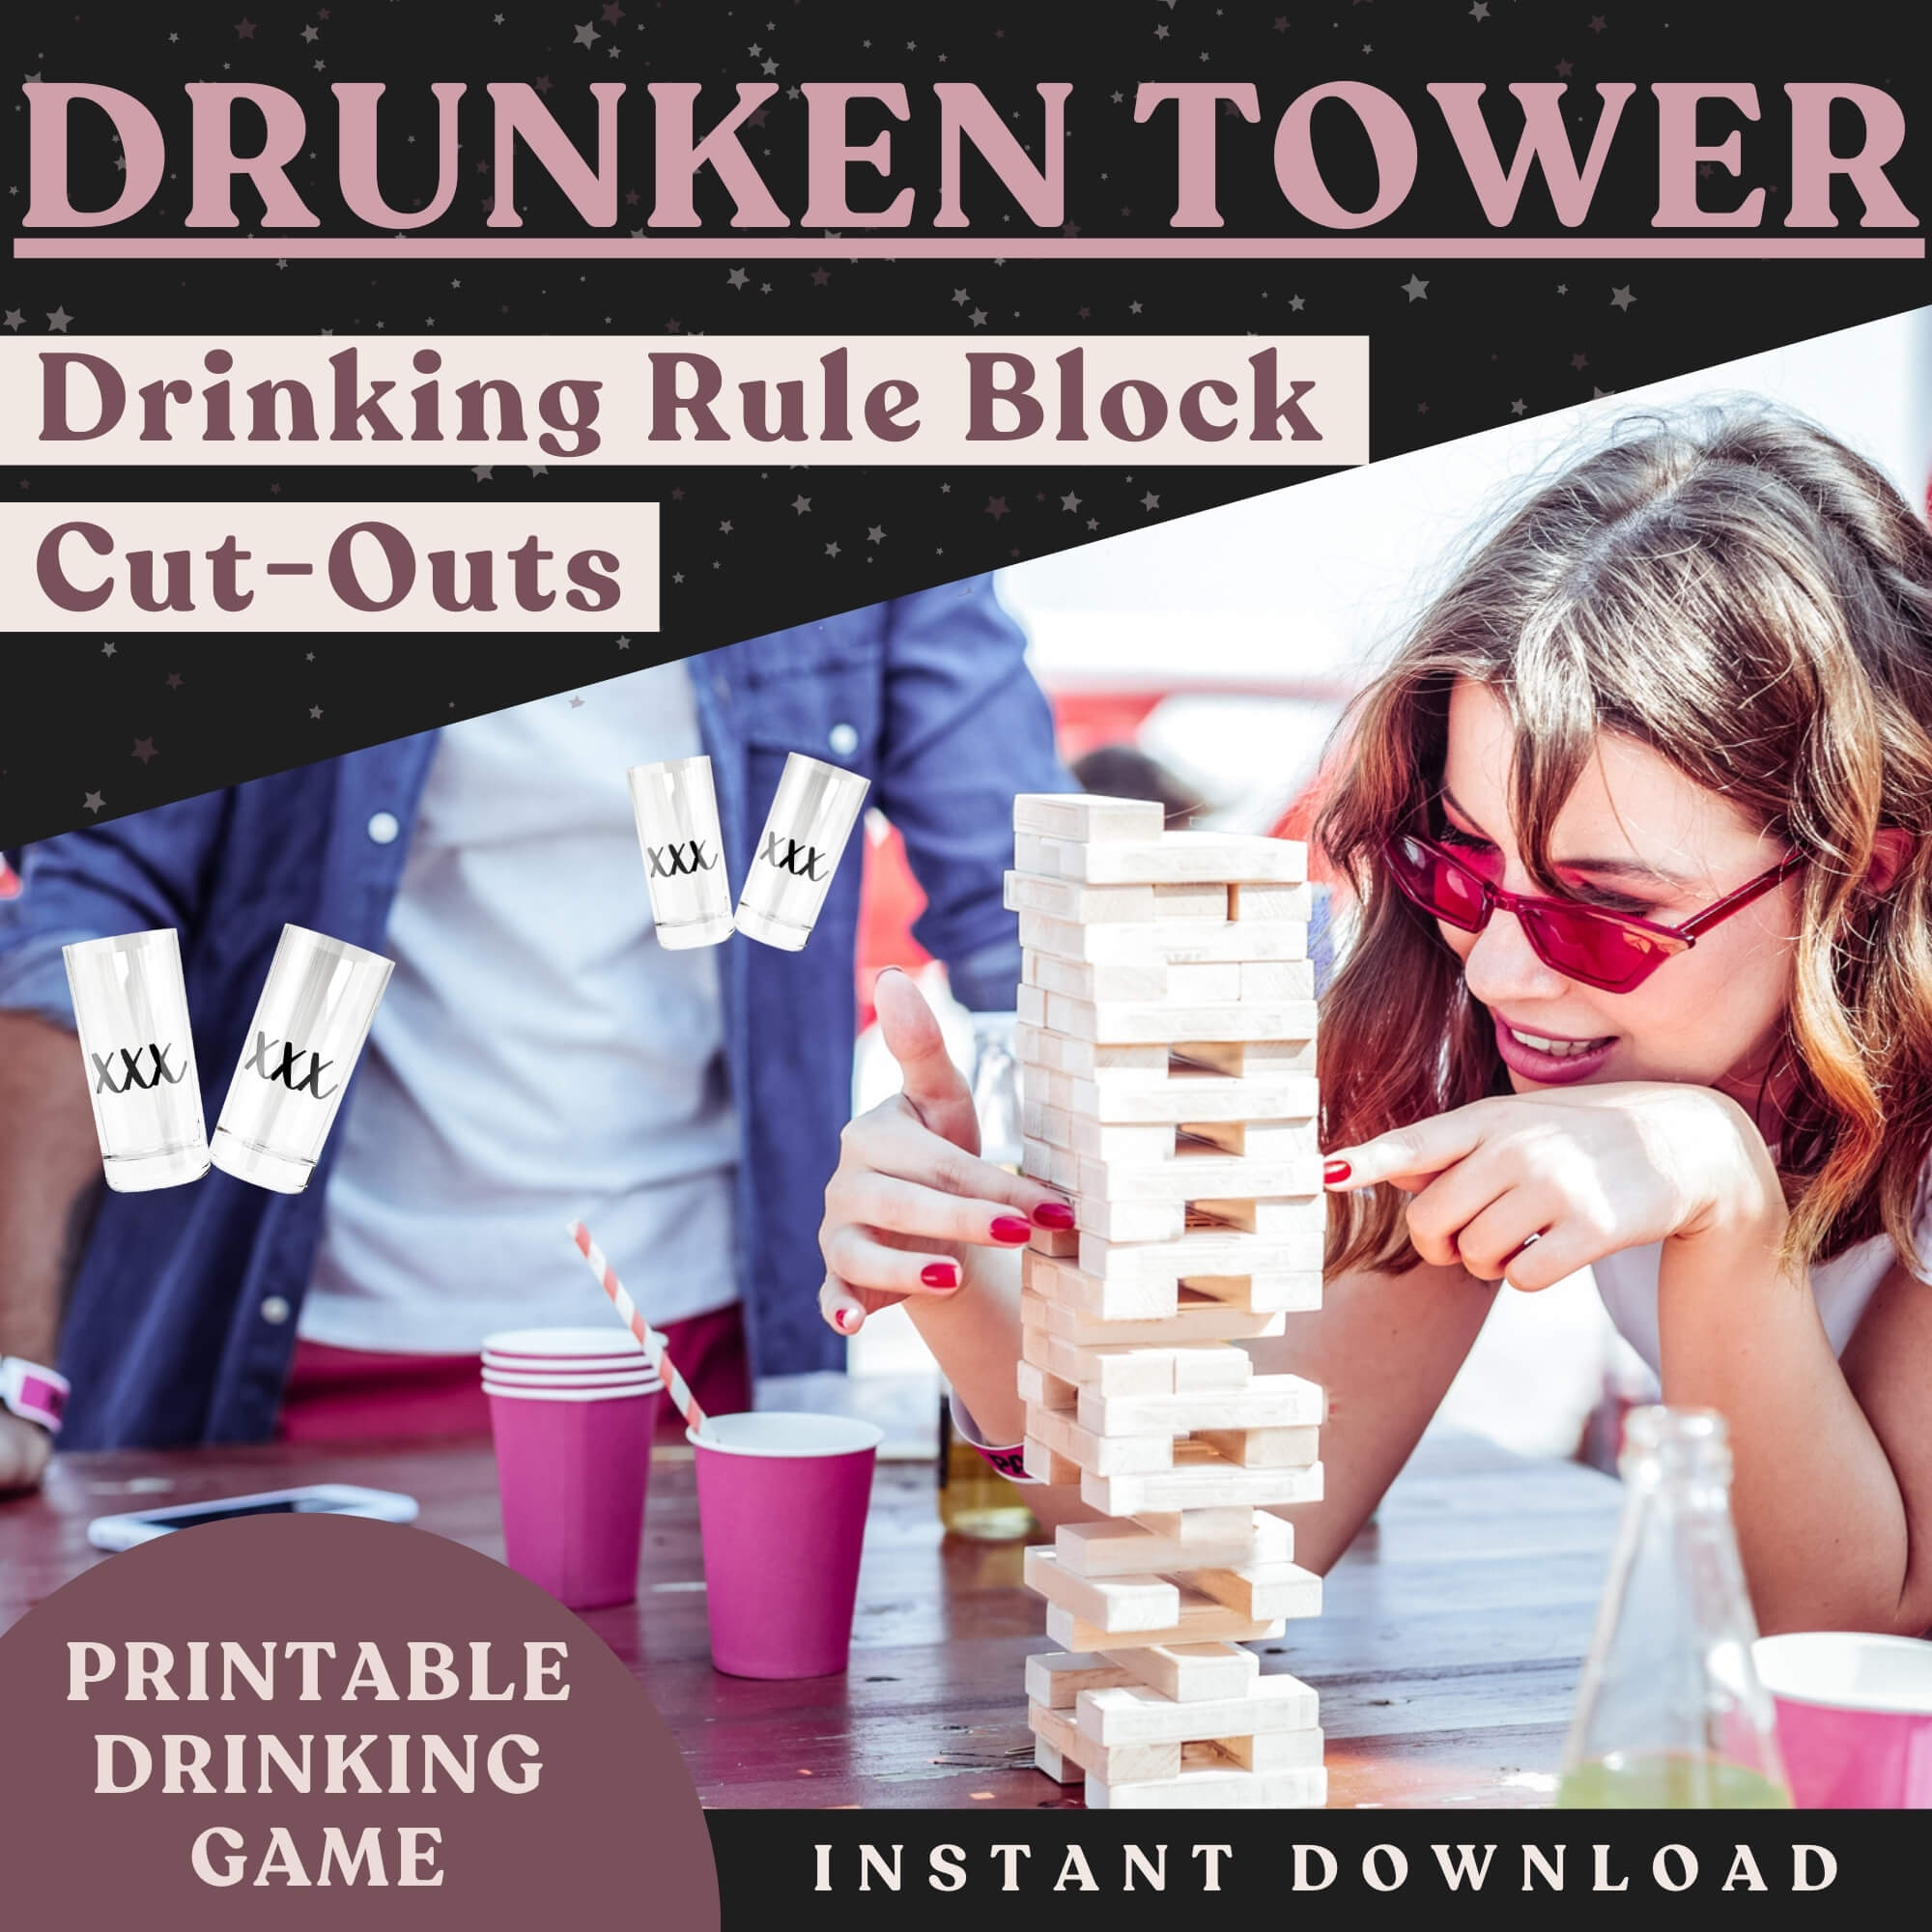 Jenga drinking game - though i'm sure you can put whatever you want..